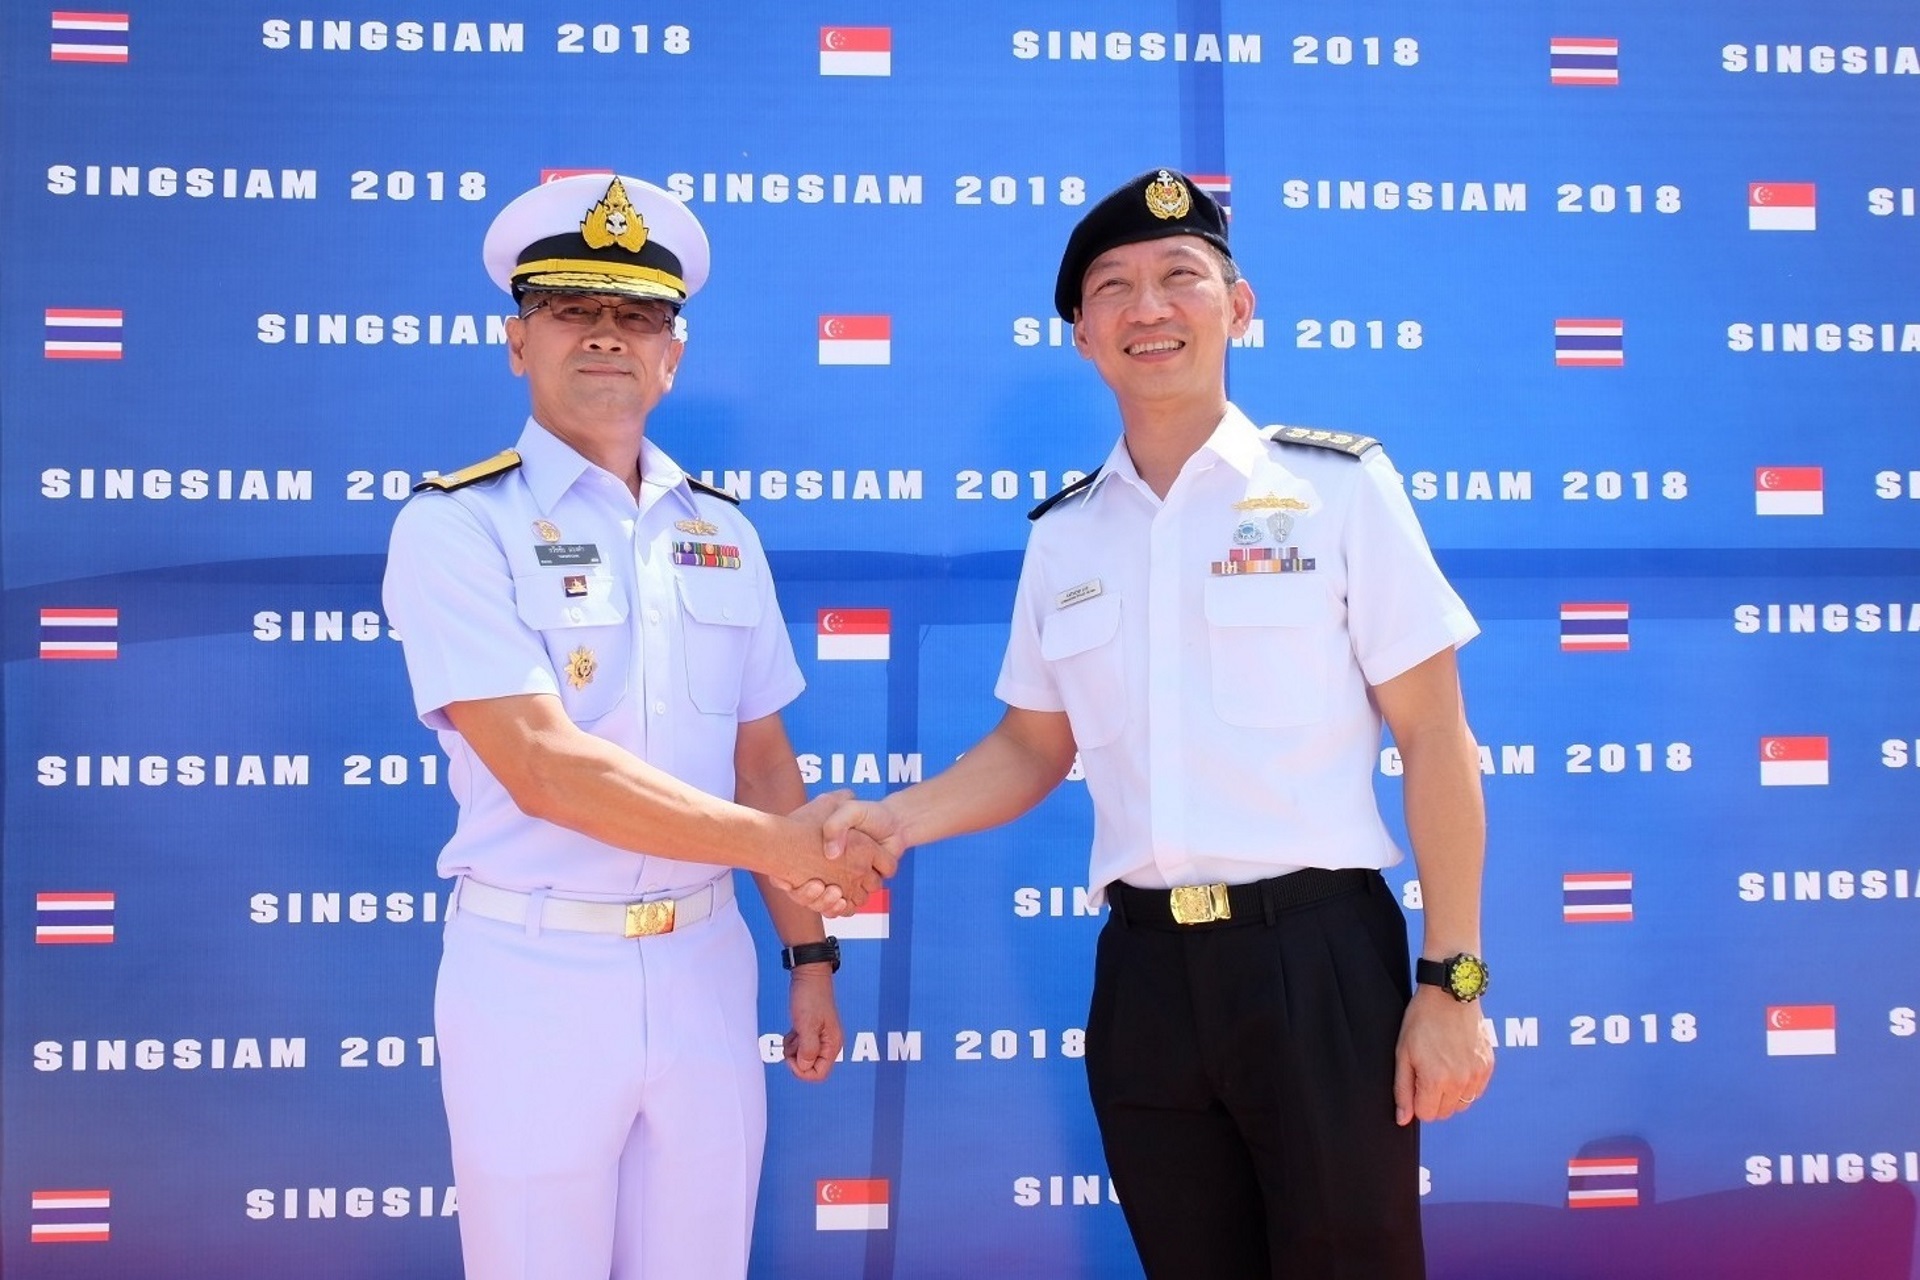 Commanding Officer of the RSN's 188 Squadron, Colonel (COL) Anthony Lee, officiating at Exercise Singsiam 2018's opening ceremony with Commanding Officer of the RTN's Frigate Squadron 2, Rear-Admiral Tawatchai Mwngkham.